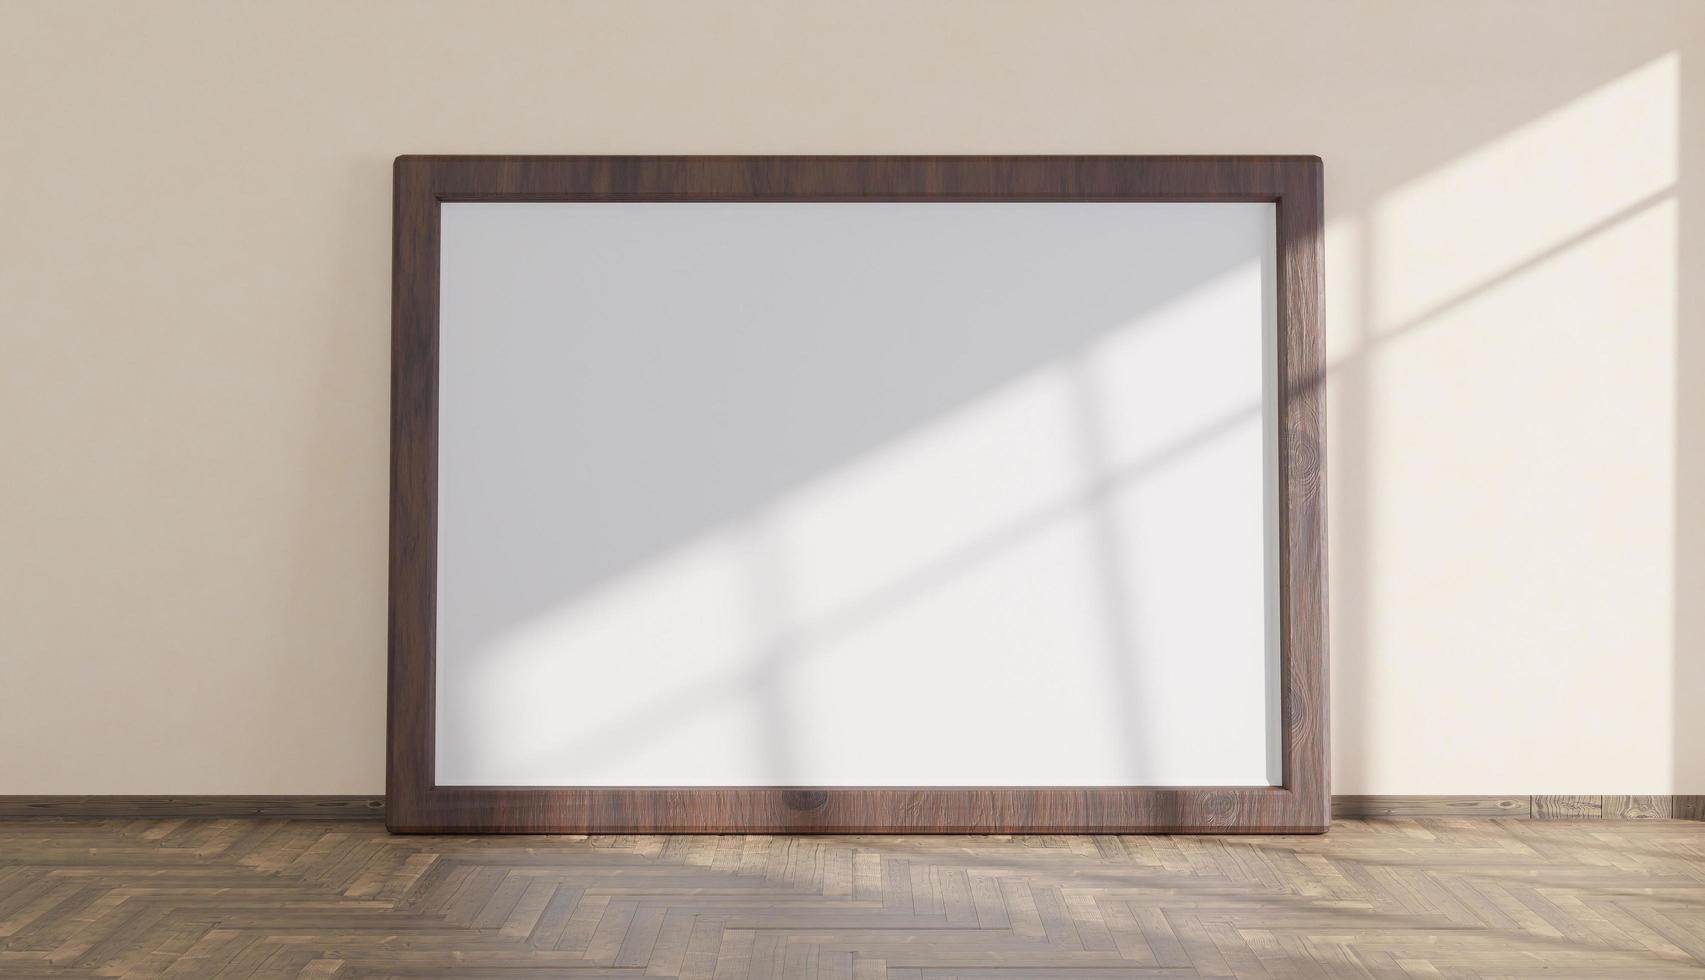 Mockup with large wooden frame on parquet floor illuminated by the light coming through the window, 3d render photo